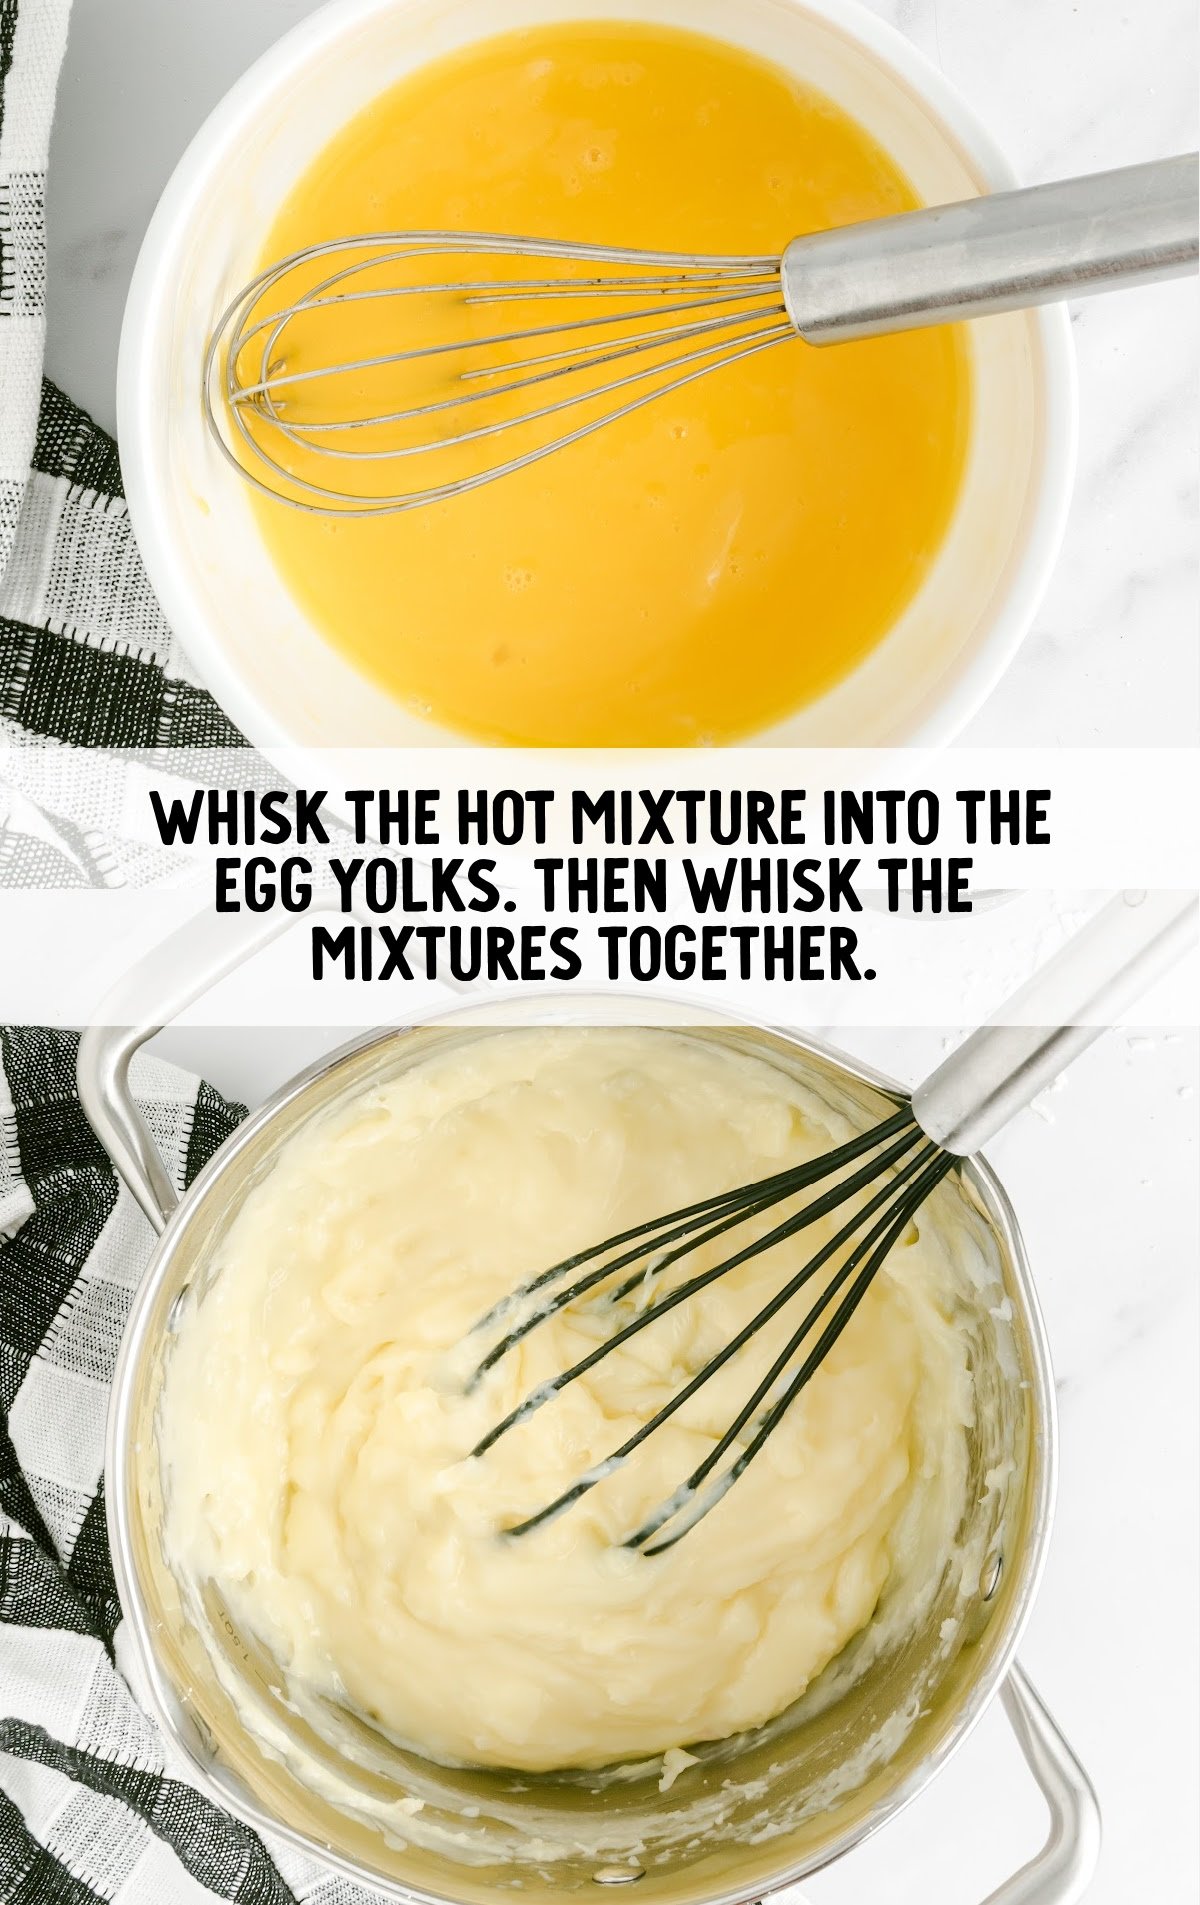 hot mixture whisked into the egg yolk and whisked mixture into the filling mixture